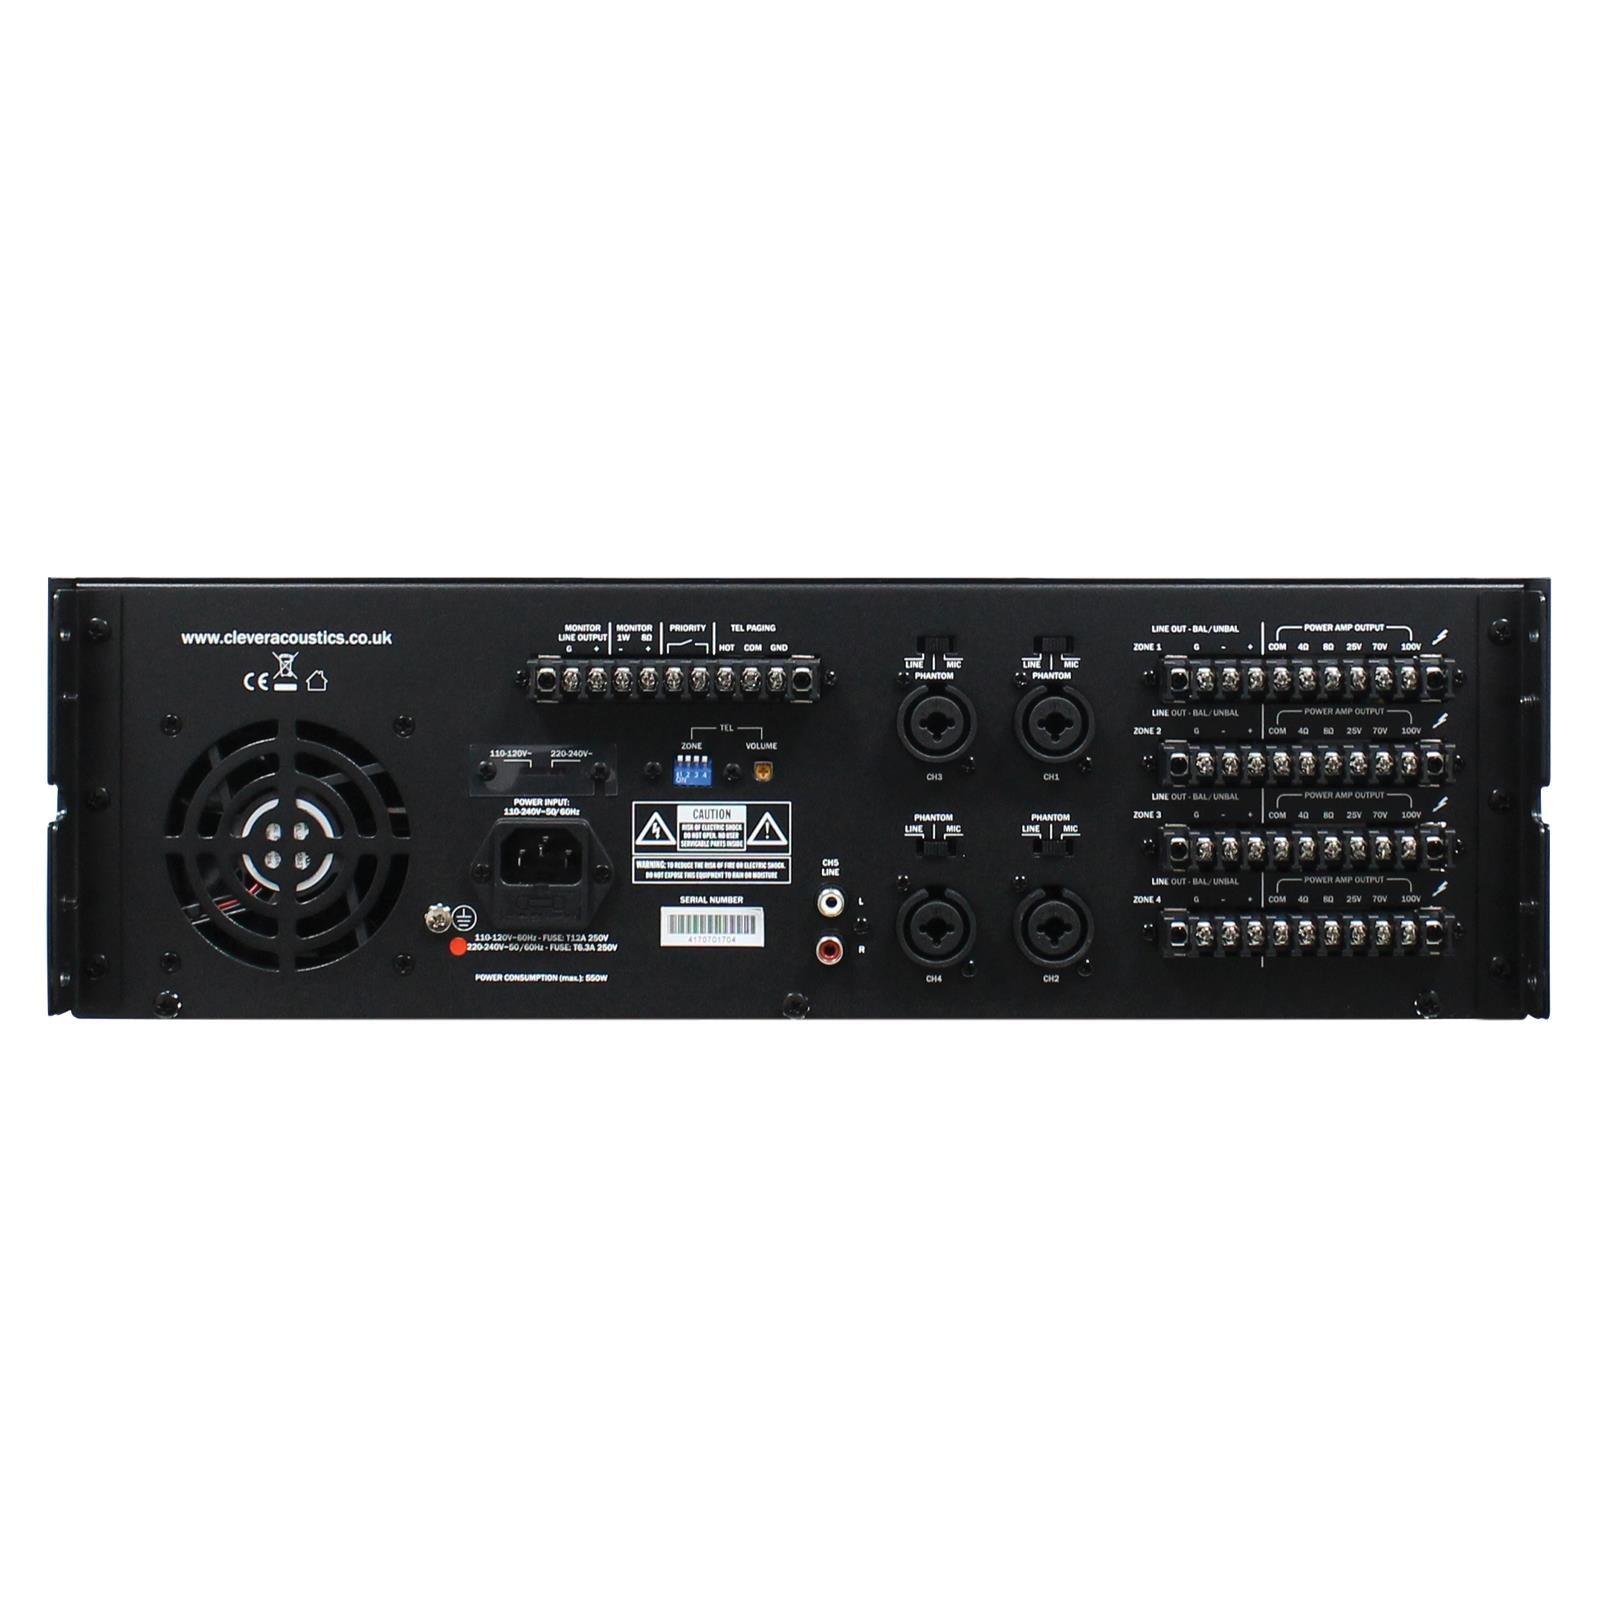 Clever Acoustics MA 4120 MKII 480W 4 Zone Mixer Amplifier - DY Pro Audio